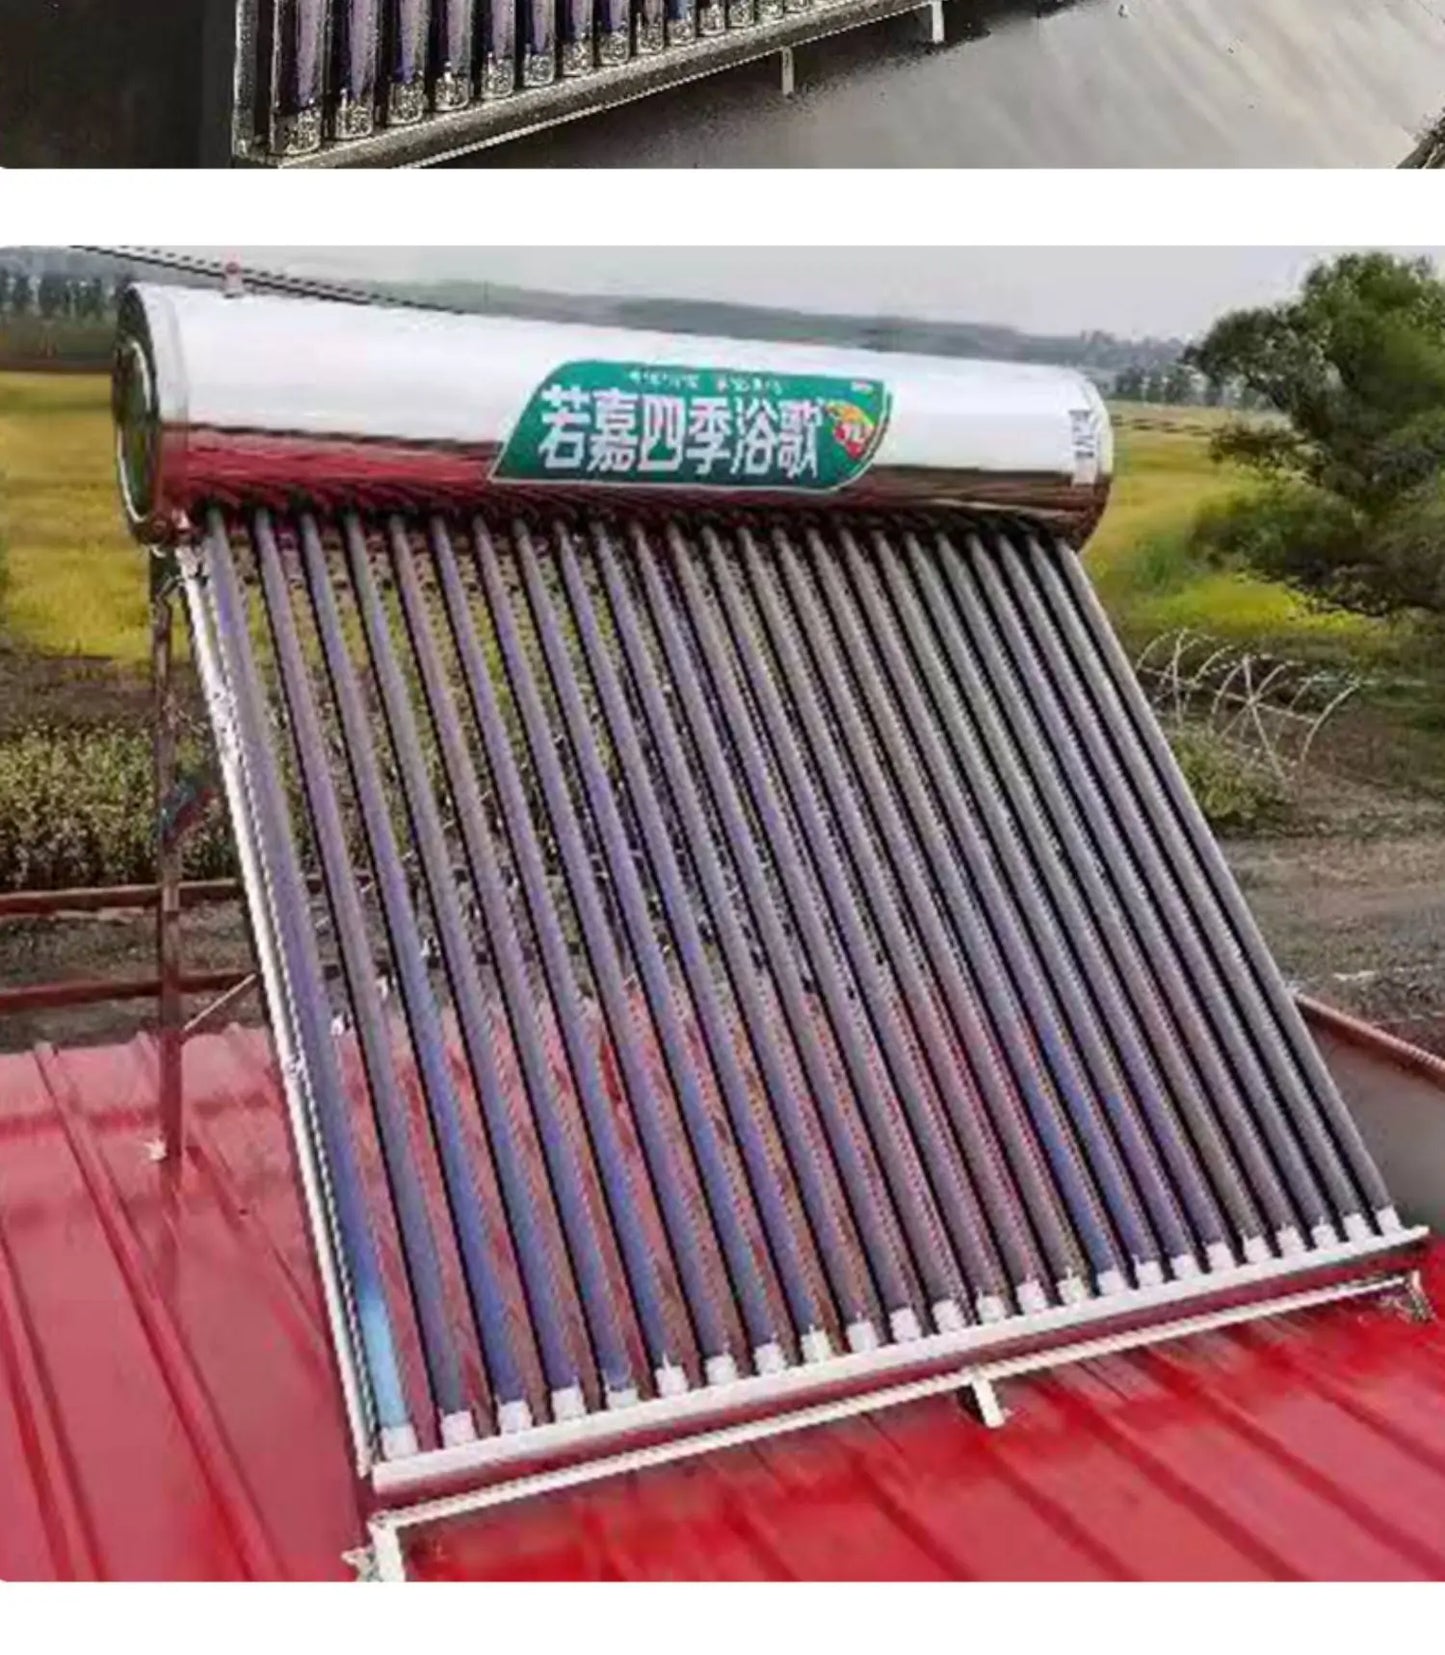 Solar Insulation Barrel Water Storage Tank
Stainless Steel Solar Water Heater
Household 20 Tubes
Automatic Water Feeding